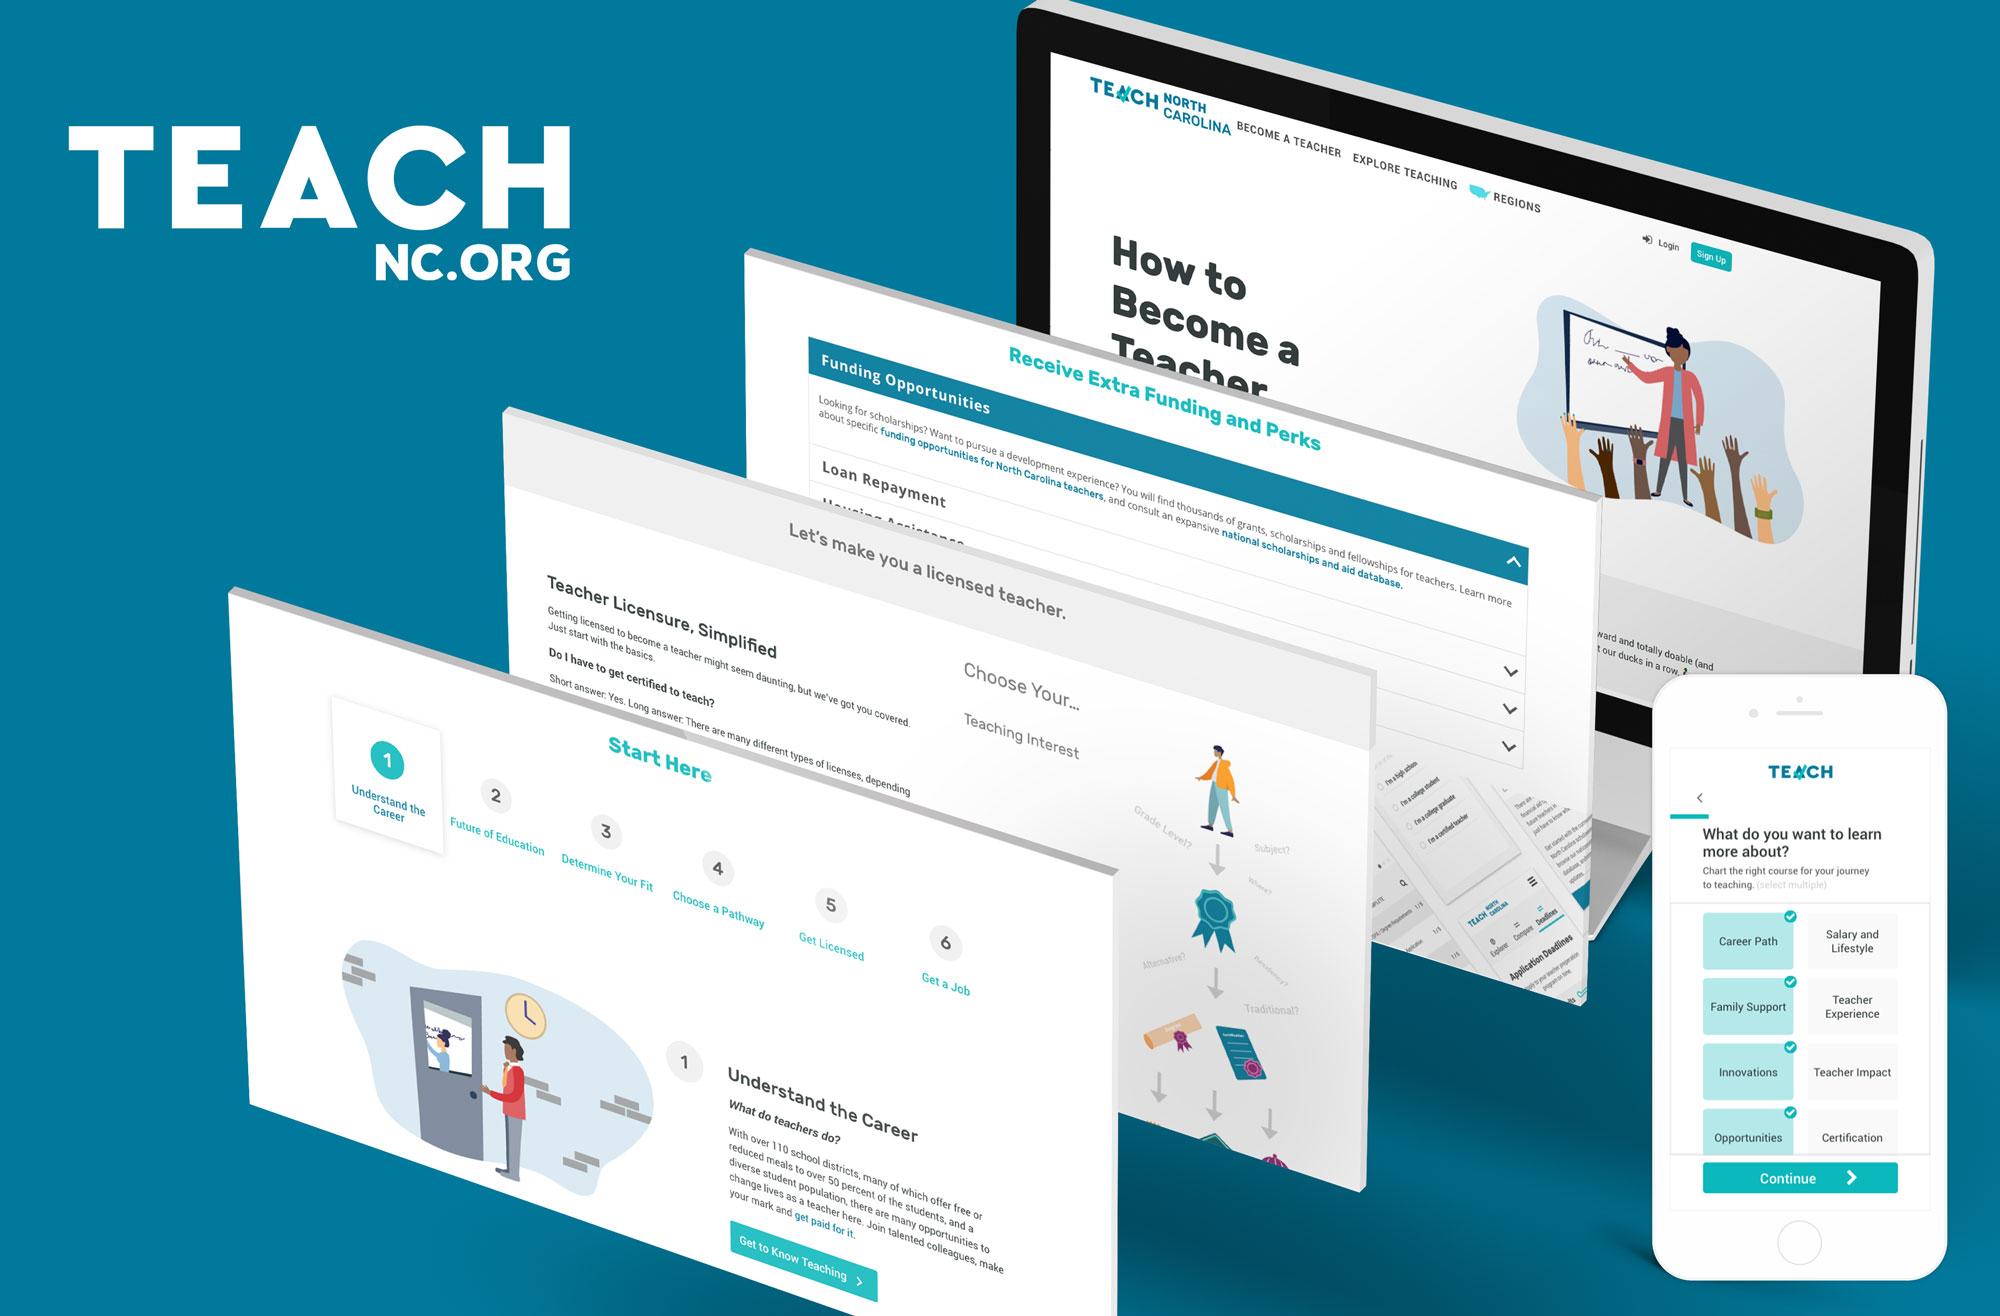 Image of products and services offered on teachnc.org